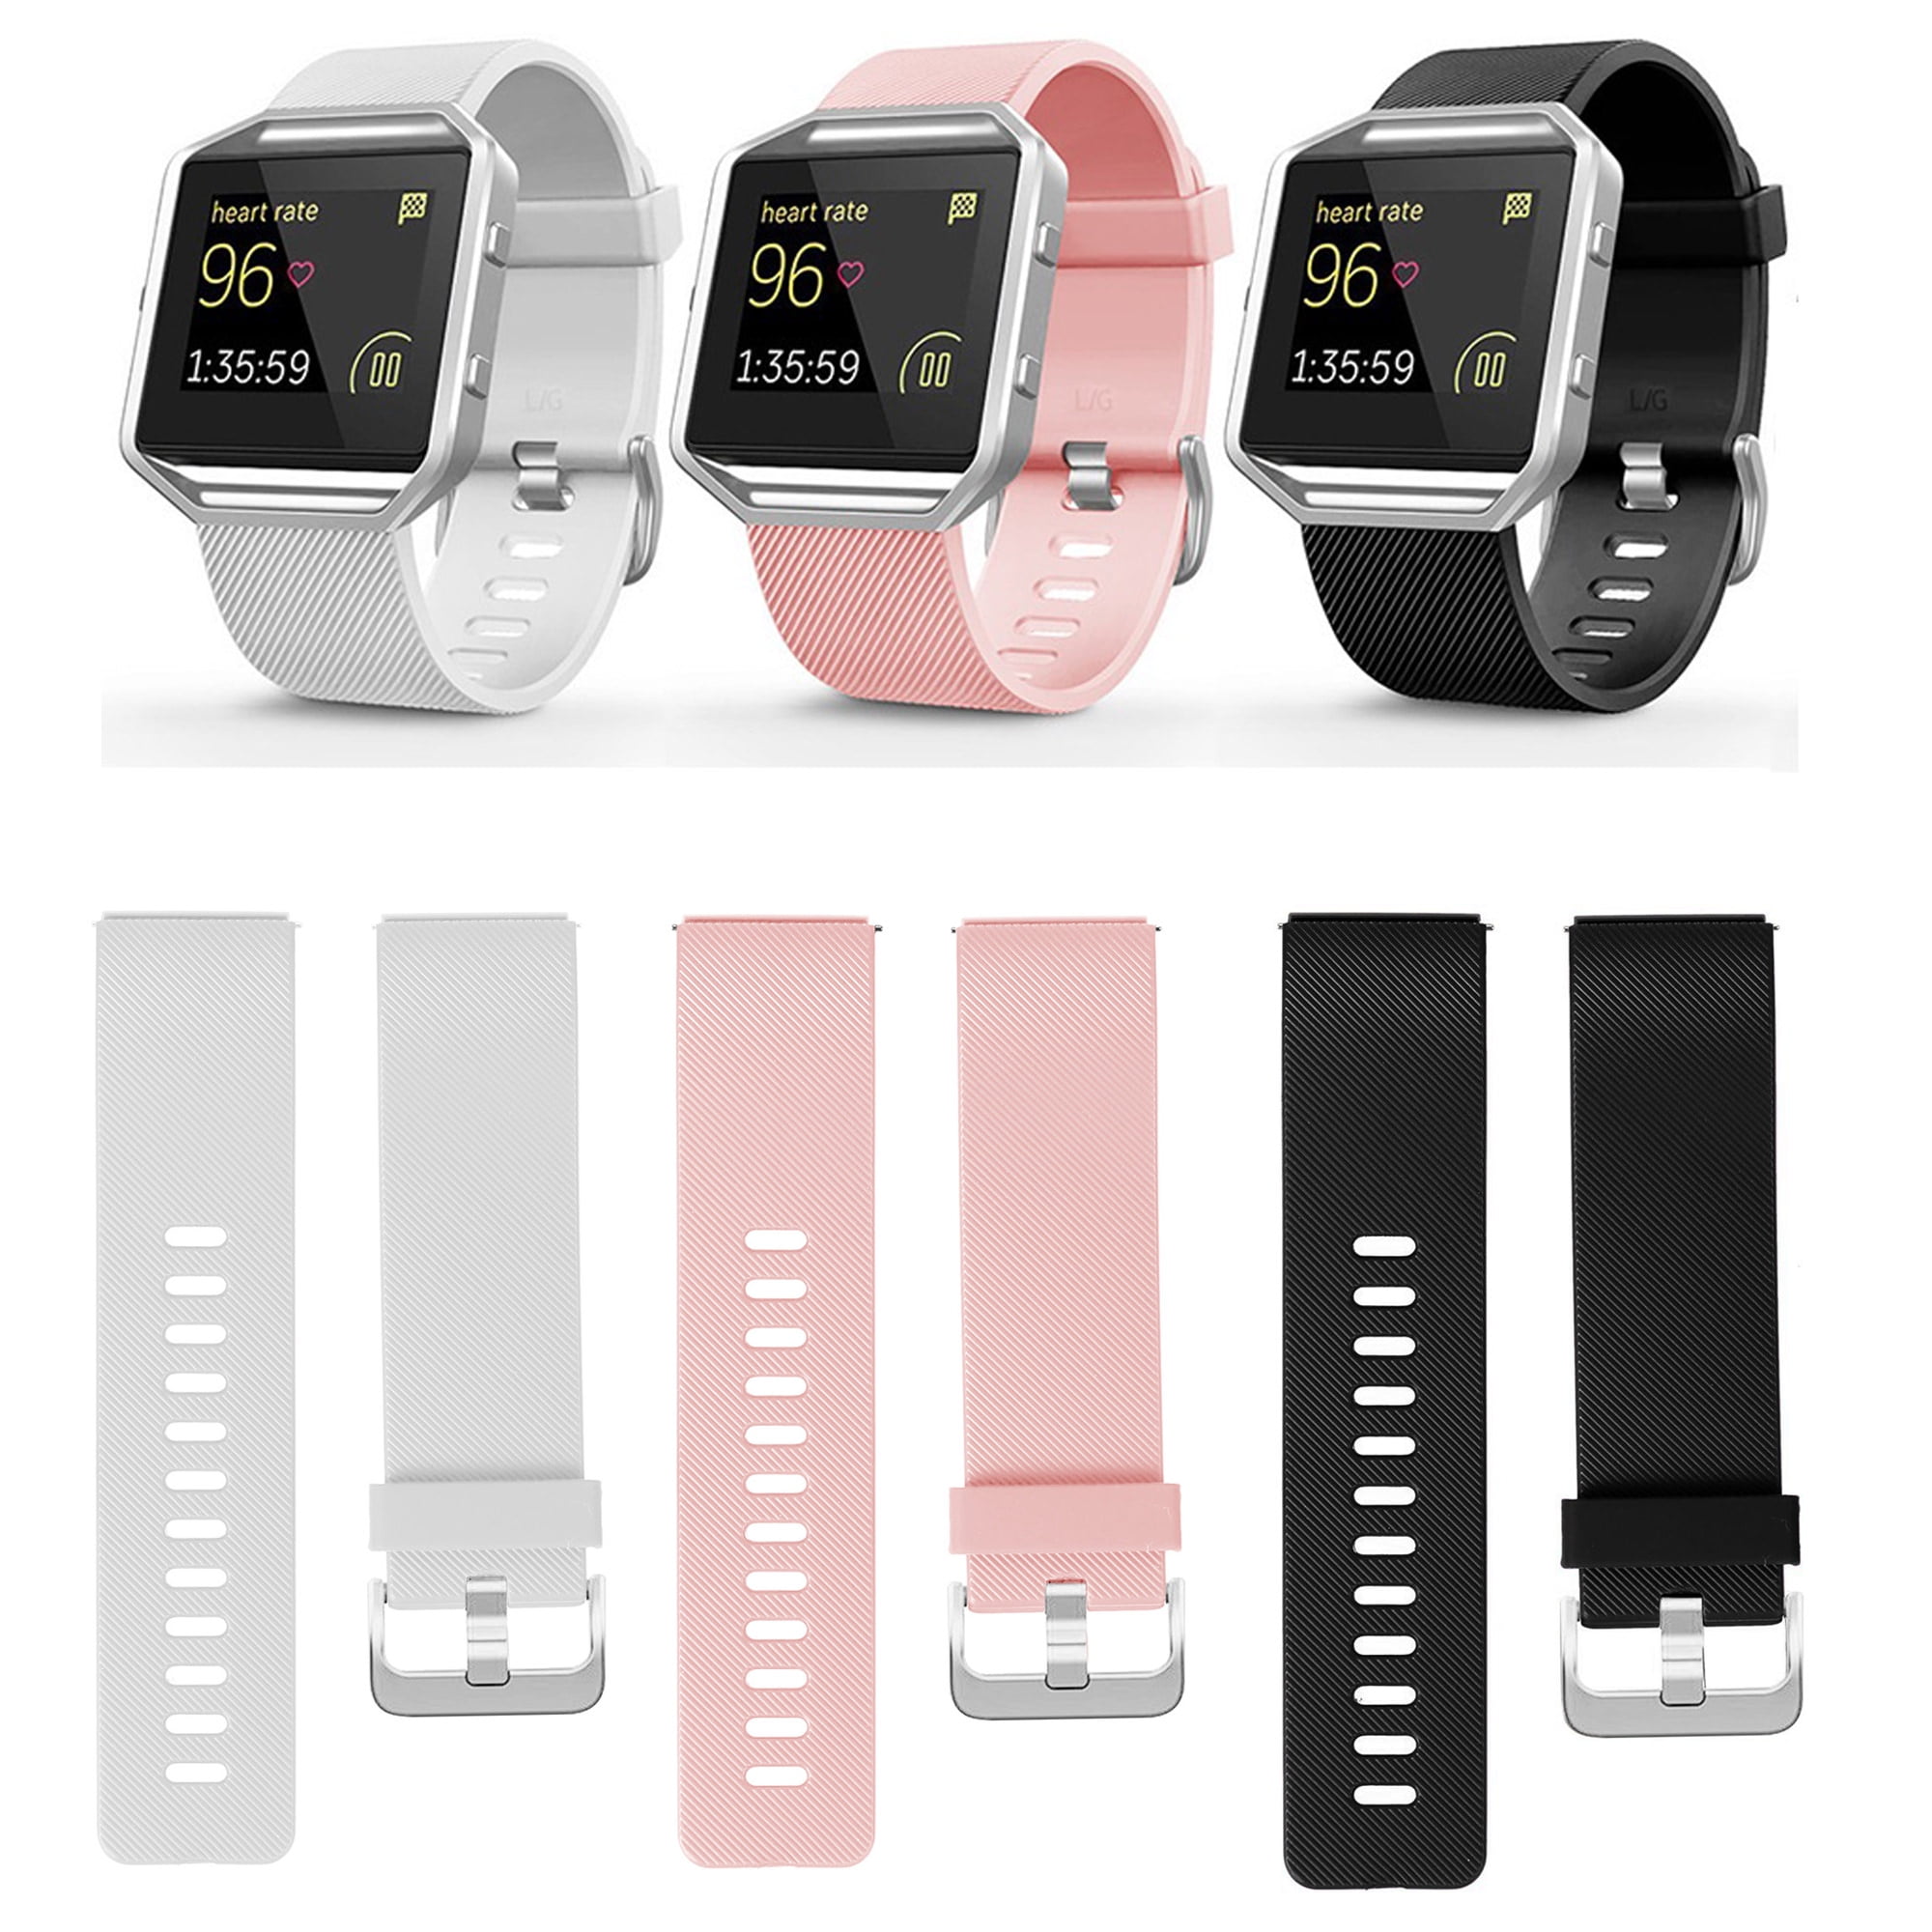 Replacement Silicone Sport Band Bracelet Strap Frame For Fitbit Blaze Tracker 